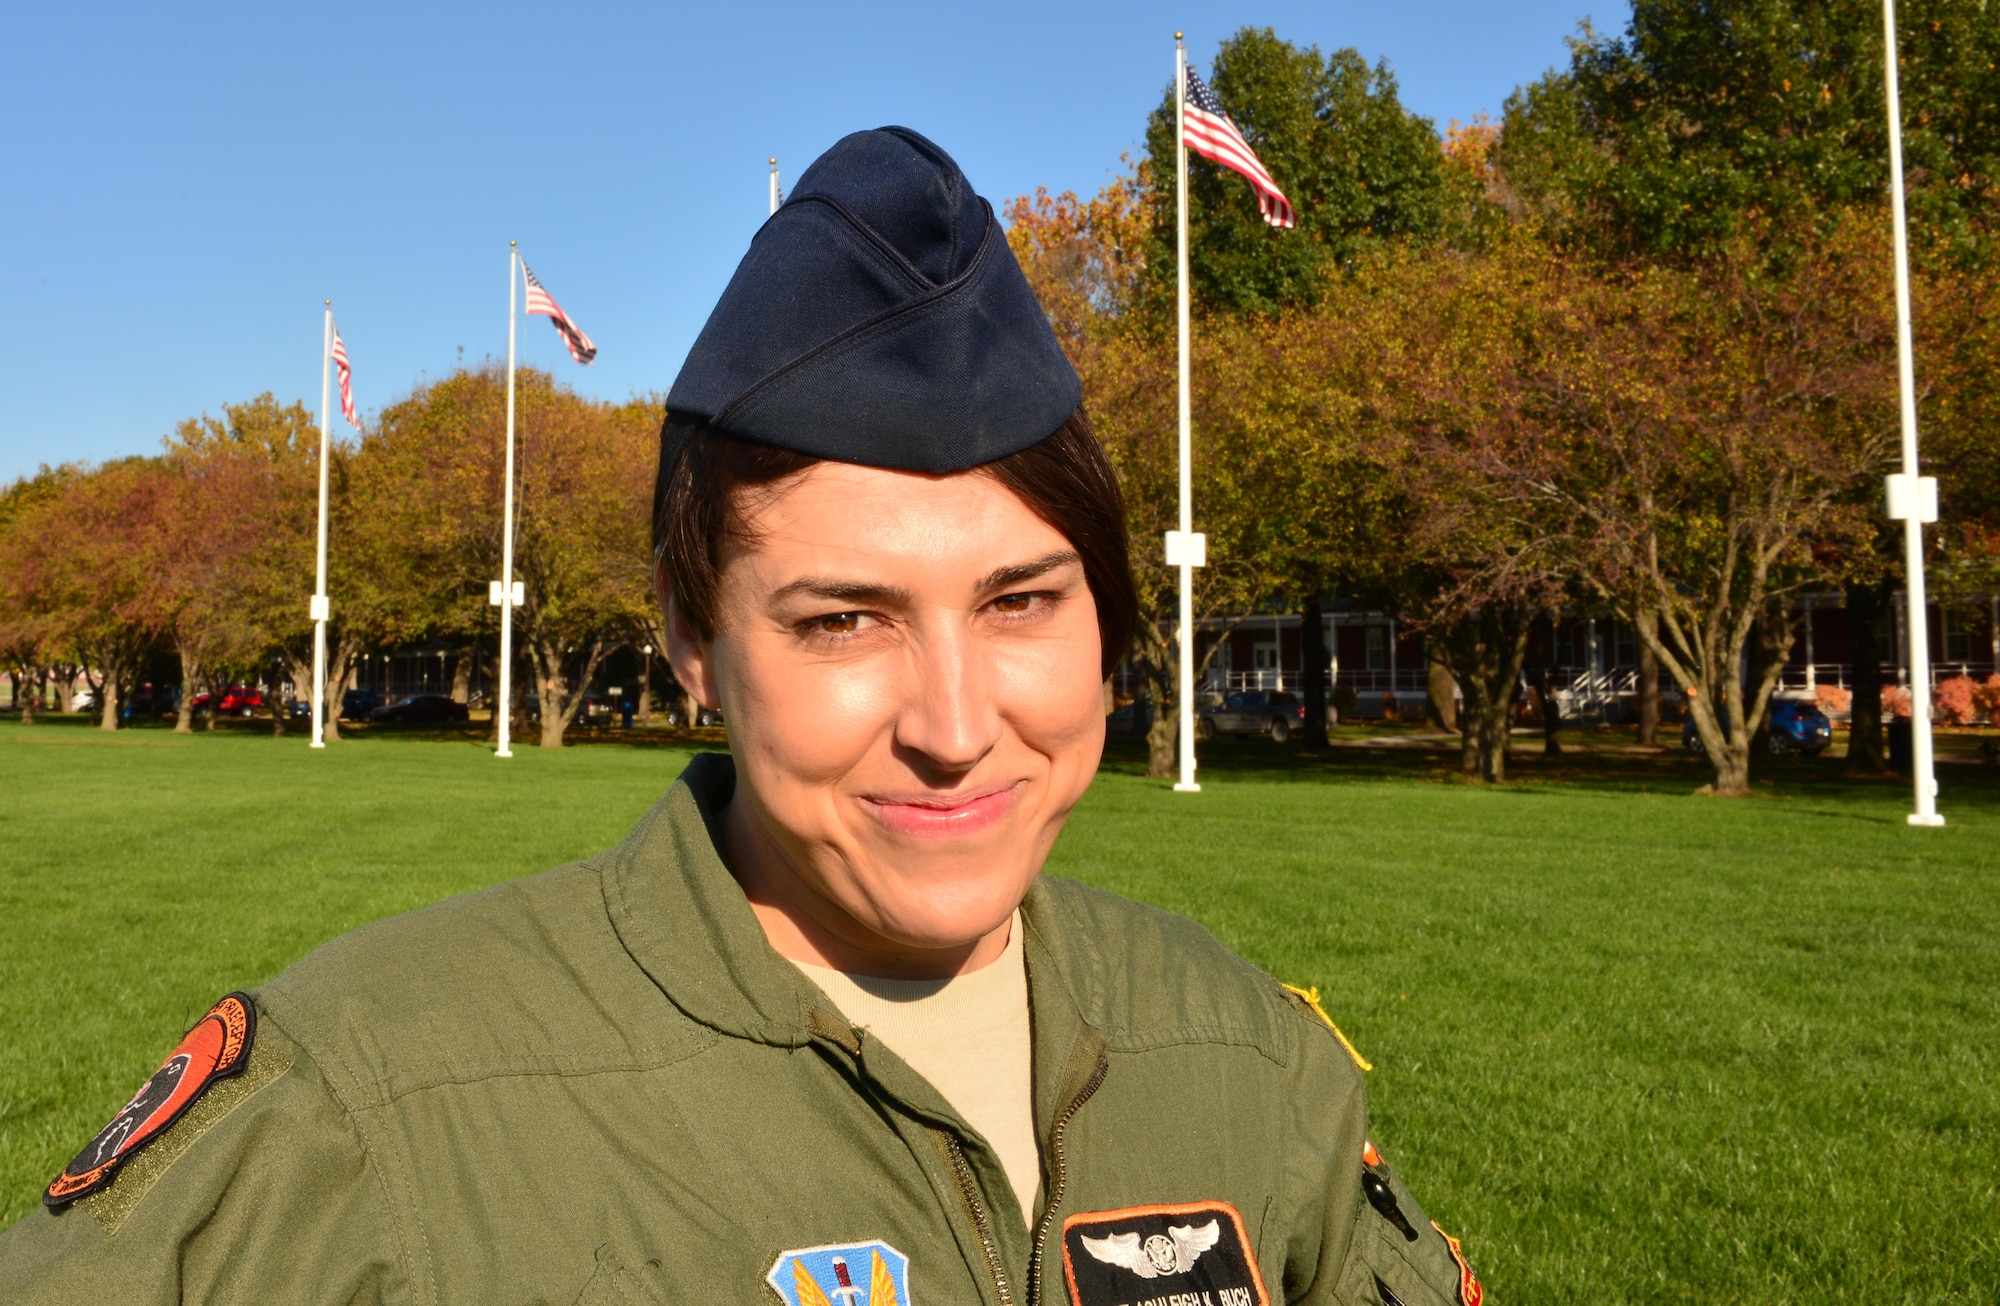 Staff Sgt. Ashleigh Buch, an instructor with the 338th Combat Training Squadron at Offutt Air Force Base, Neb., stands on the Offutt Parade Field Oct. 20, 2016. Buch is the first openly serving transgender Airman to be recommended for a return to flying duties. (U.S. Air Force photo/Senior Airman Rachel Hammes)